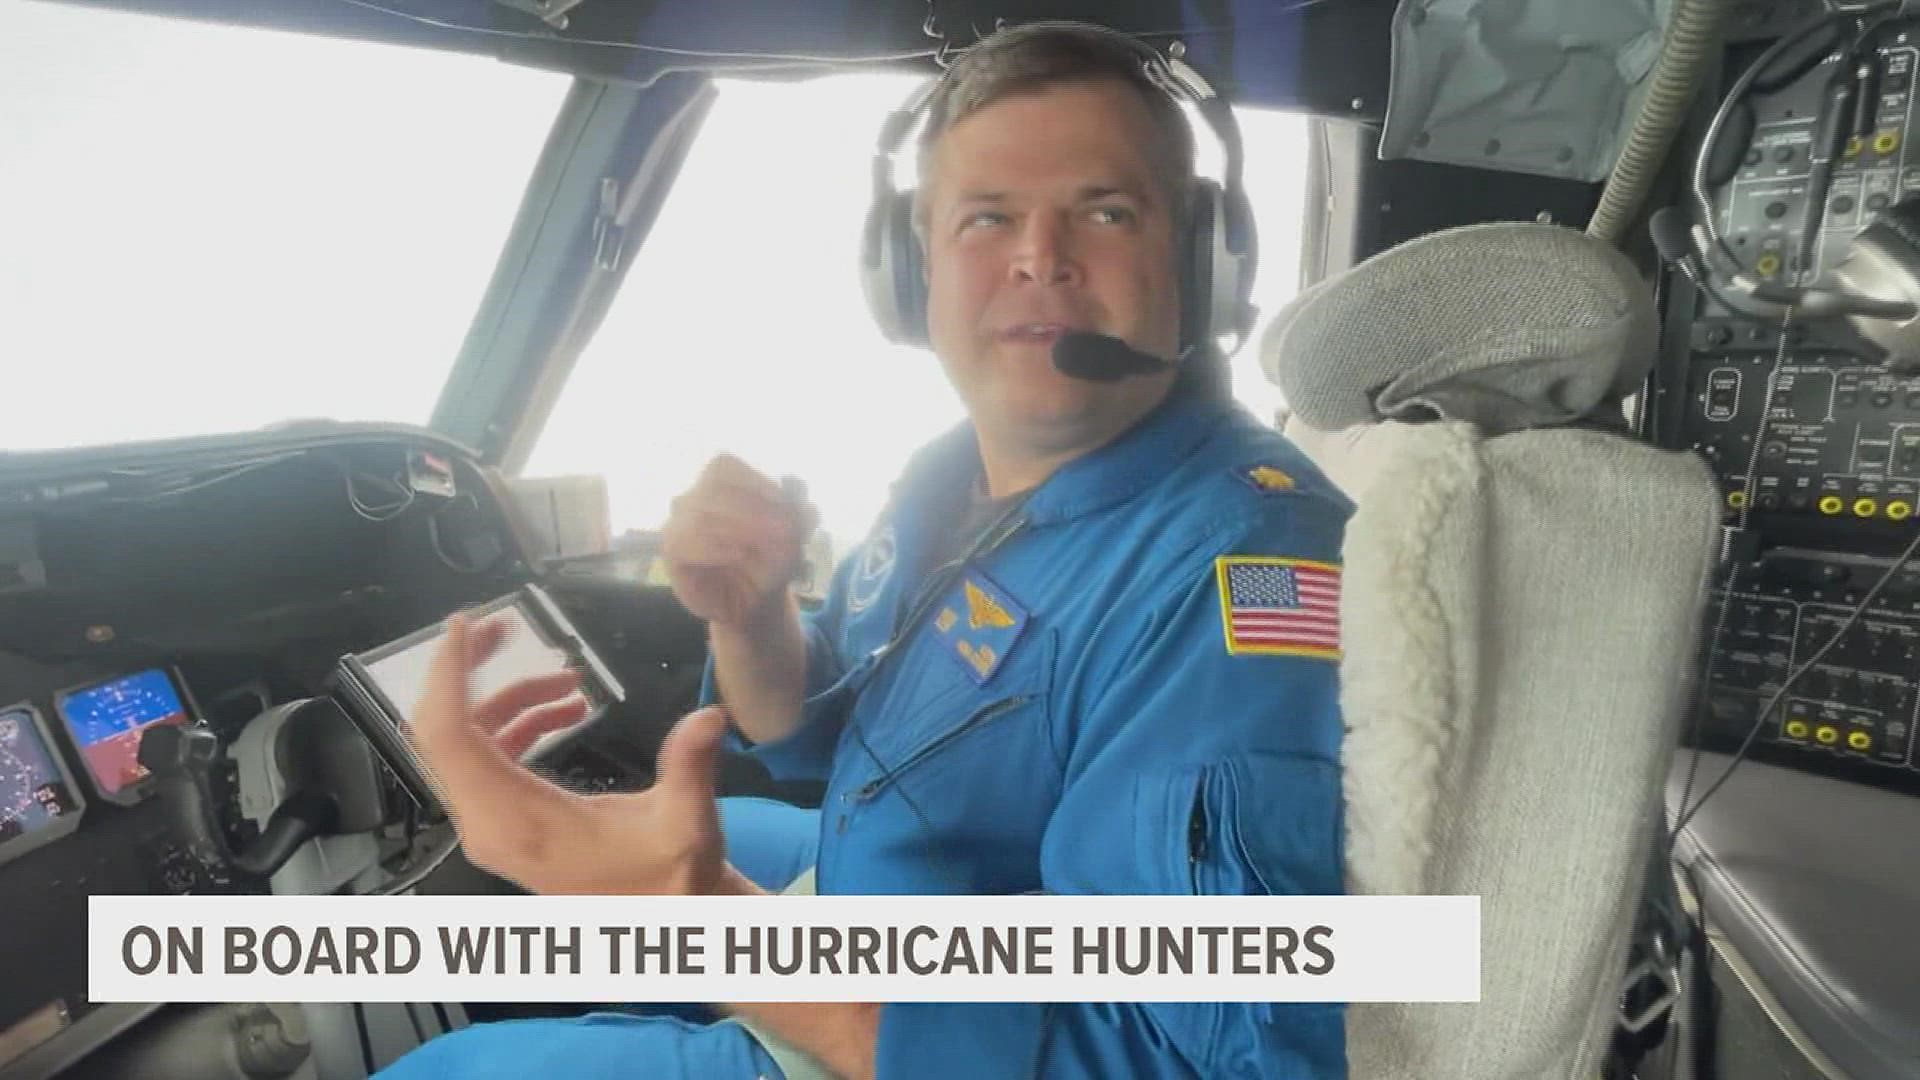 Hurricane hunters fly  in and out of storms in order to collect data on the current atmospheric conditions. Missions can take up to 10 hours.